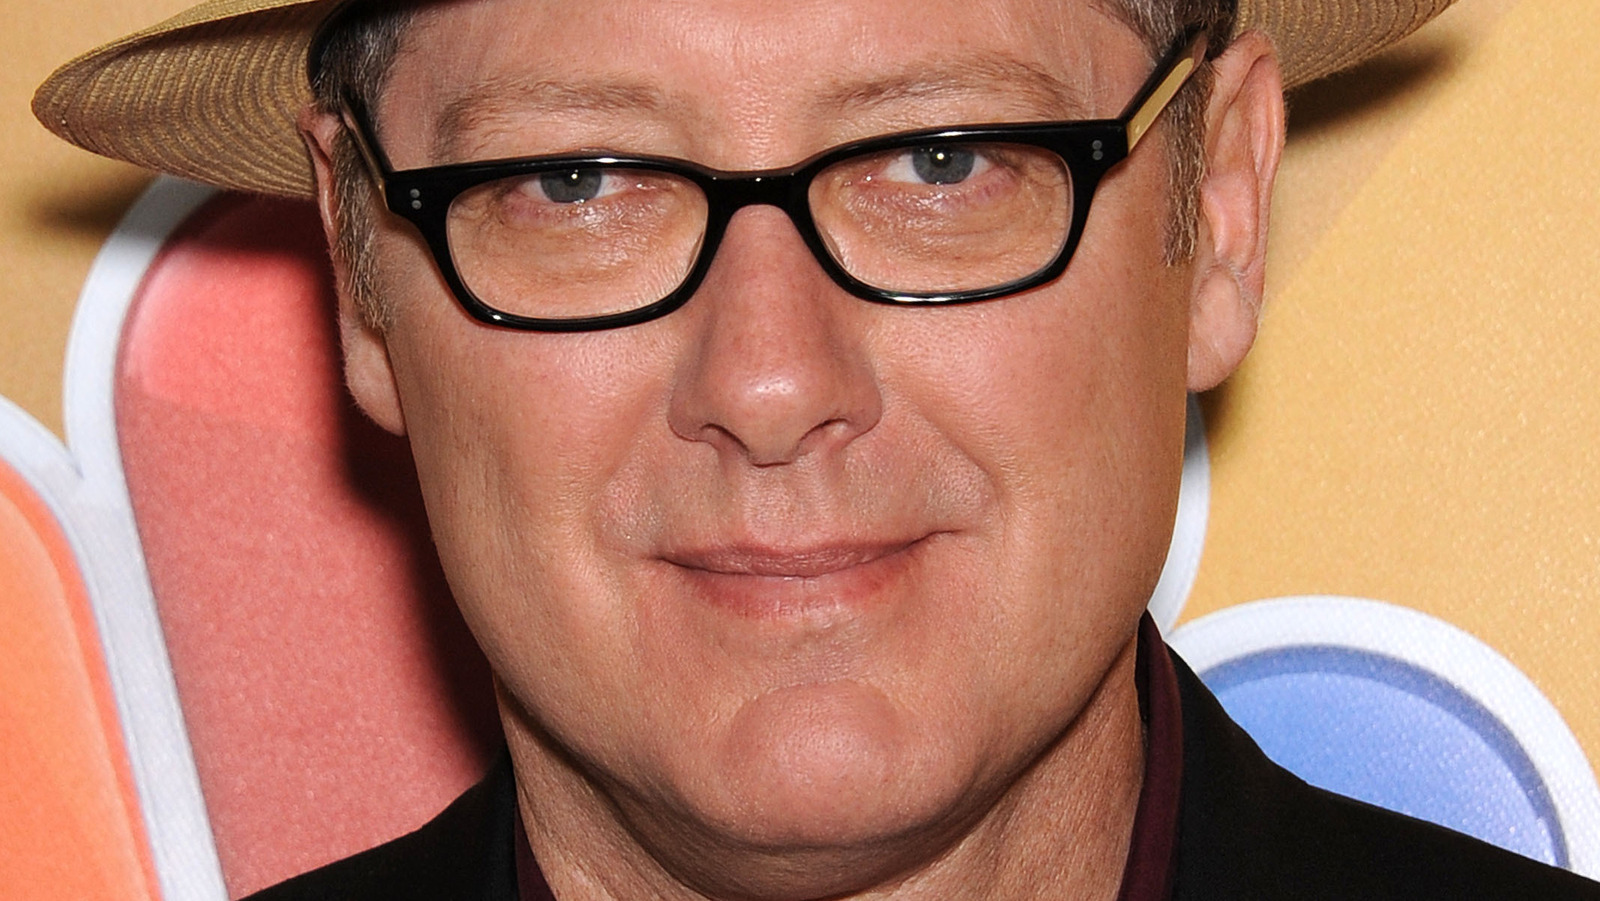 https://www.nickiswift.com/img/gallery/why-people-dont-like-working-with-james-spader/l-intro-1644811881.jpg